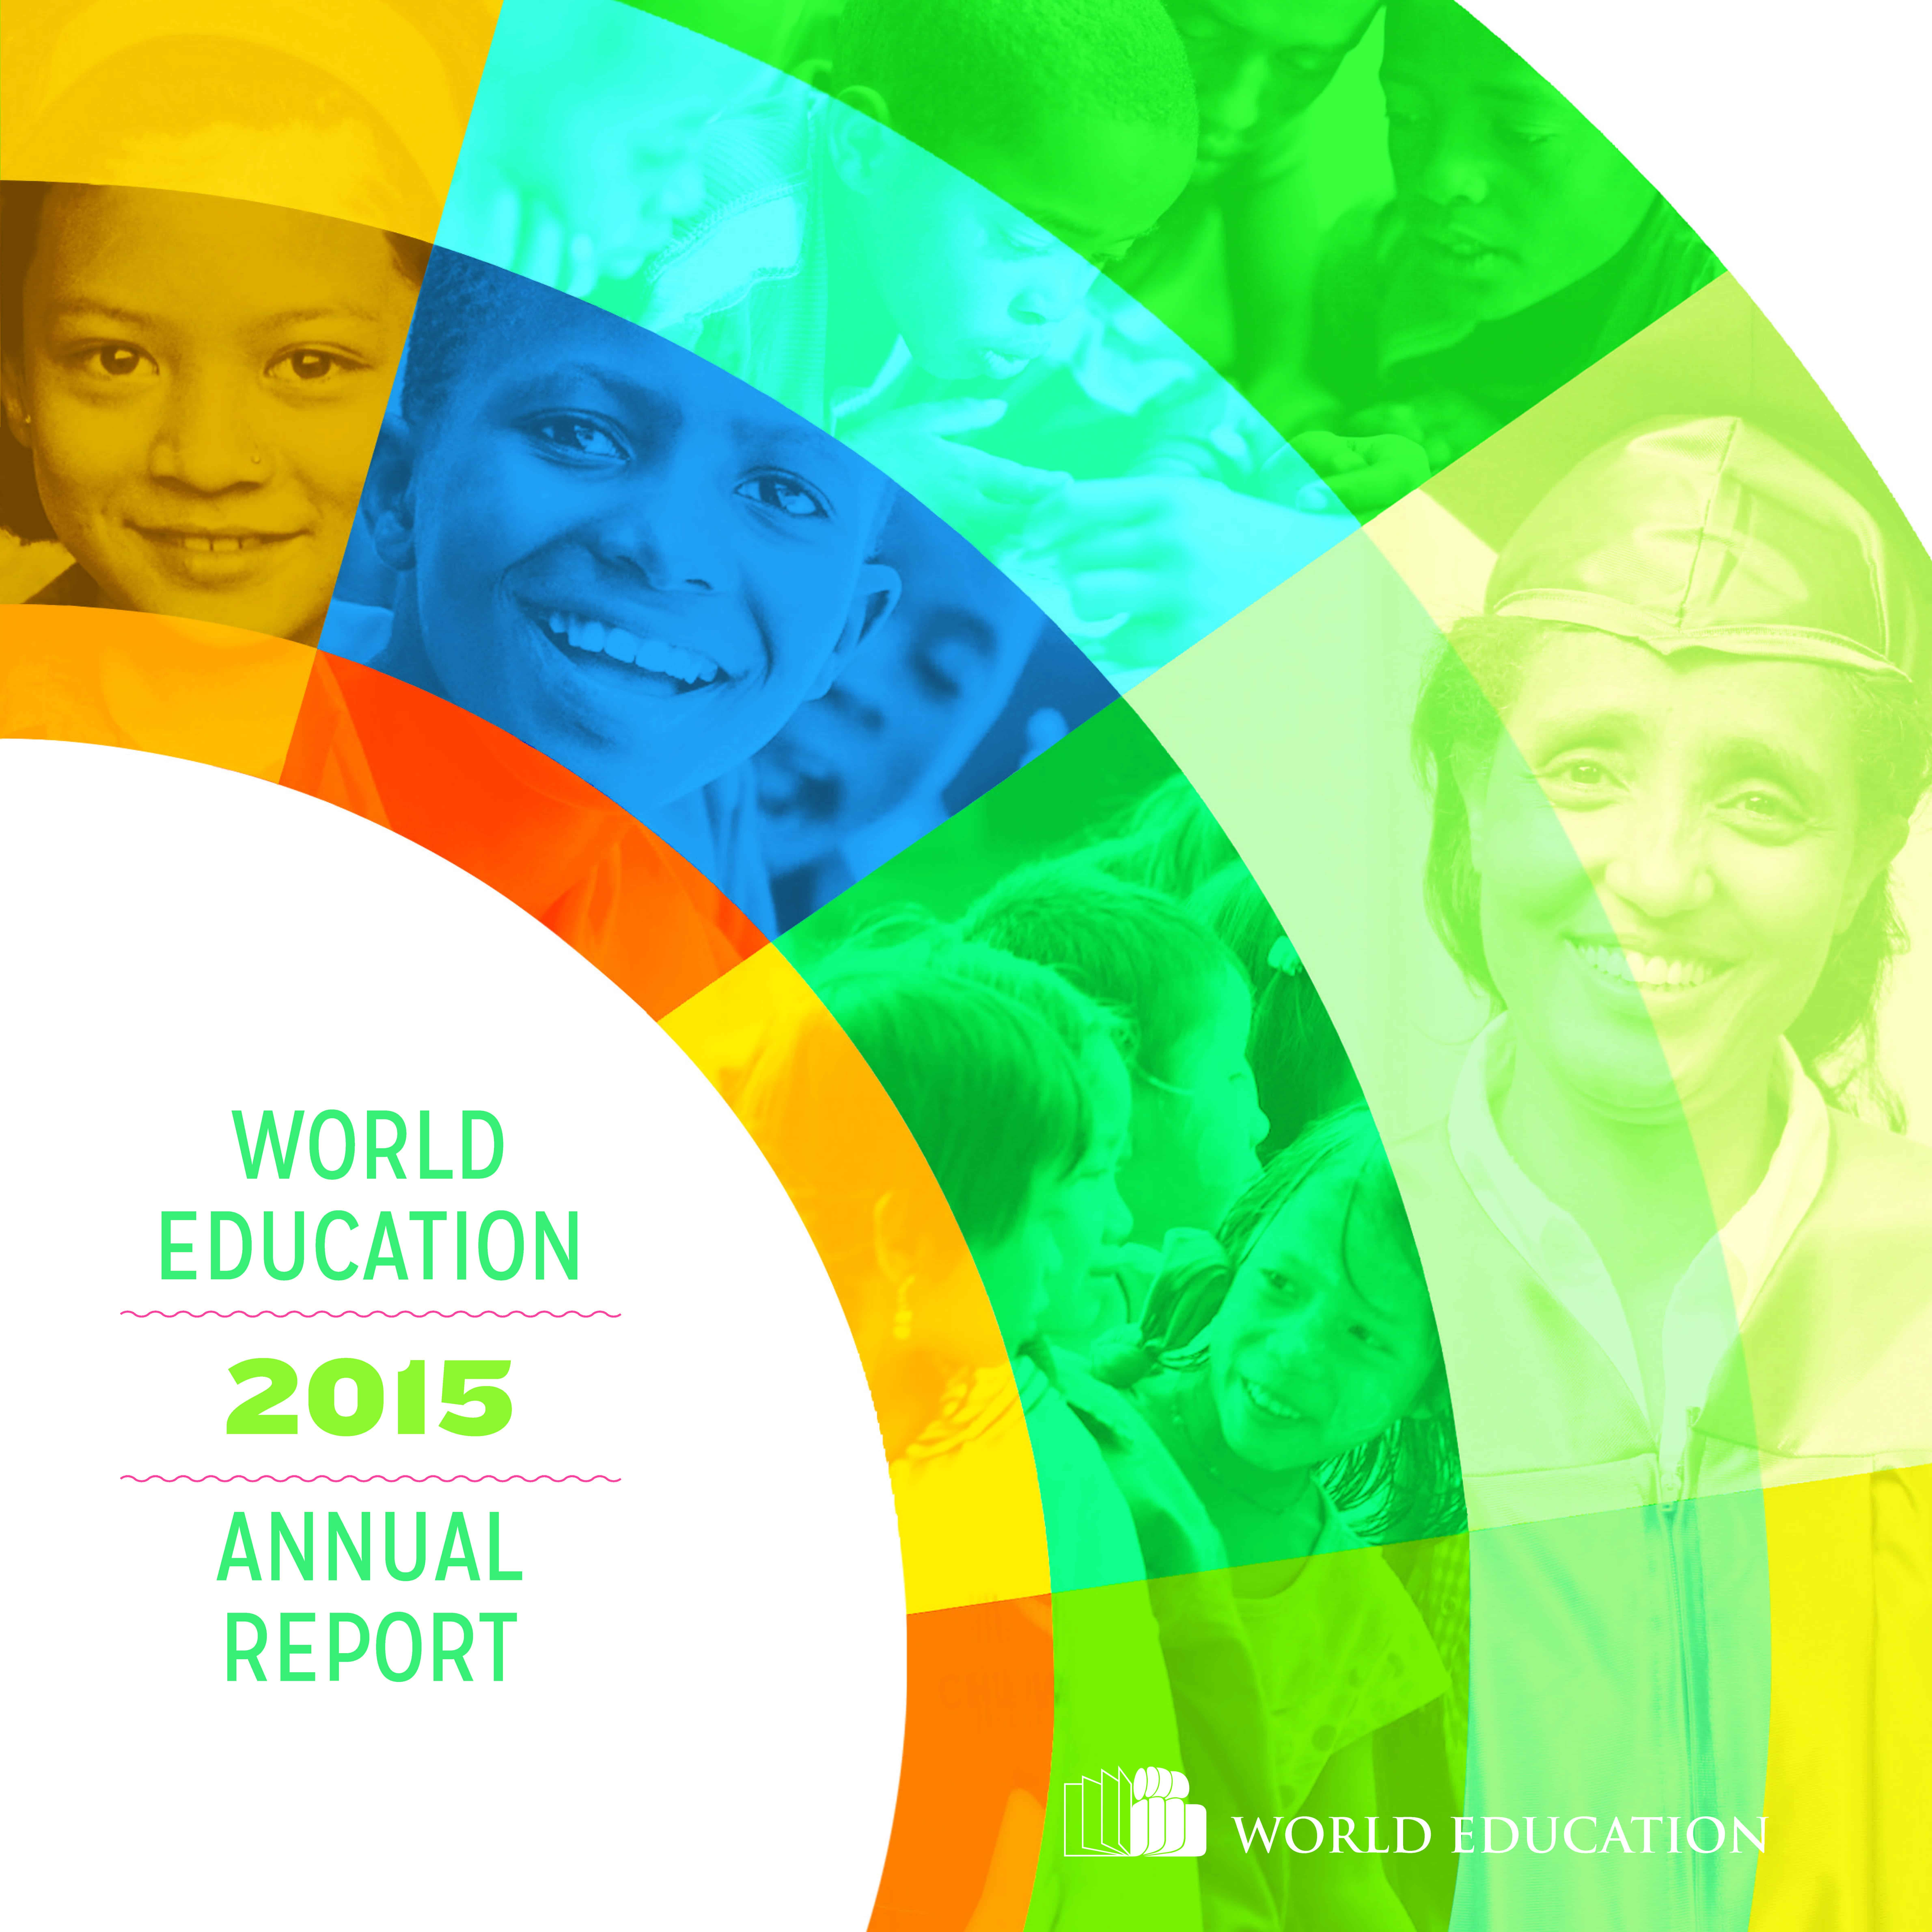 World Education 2015 Annual Report